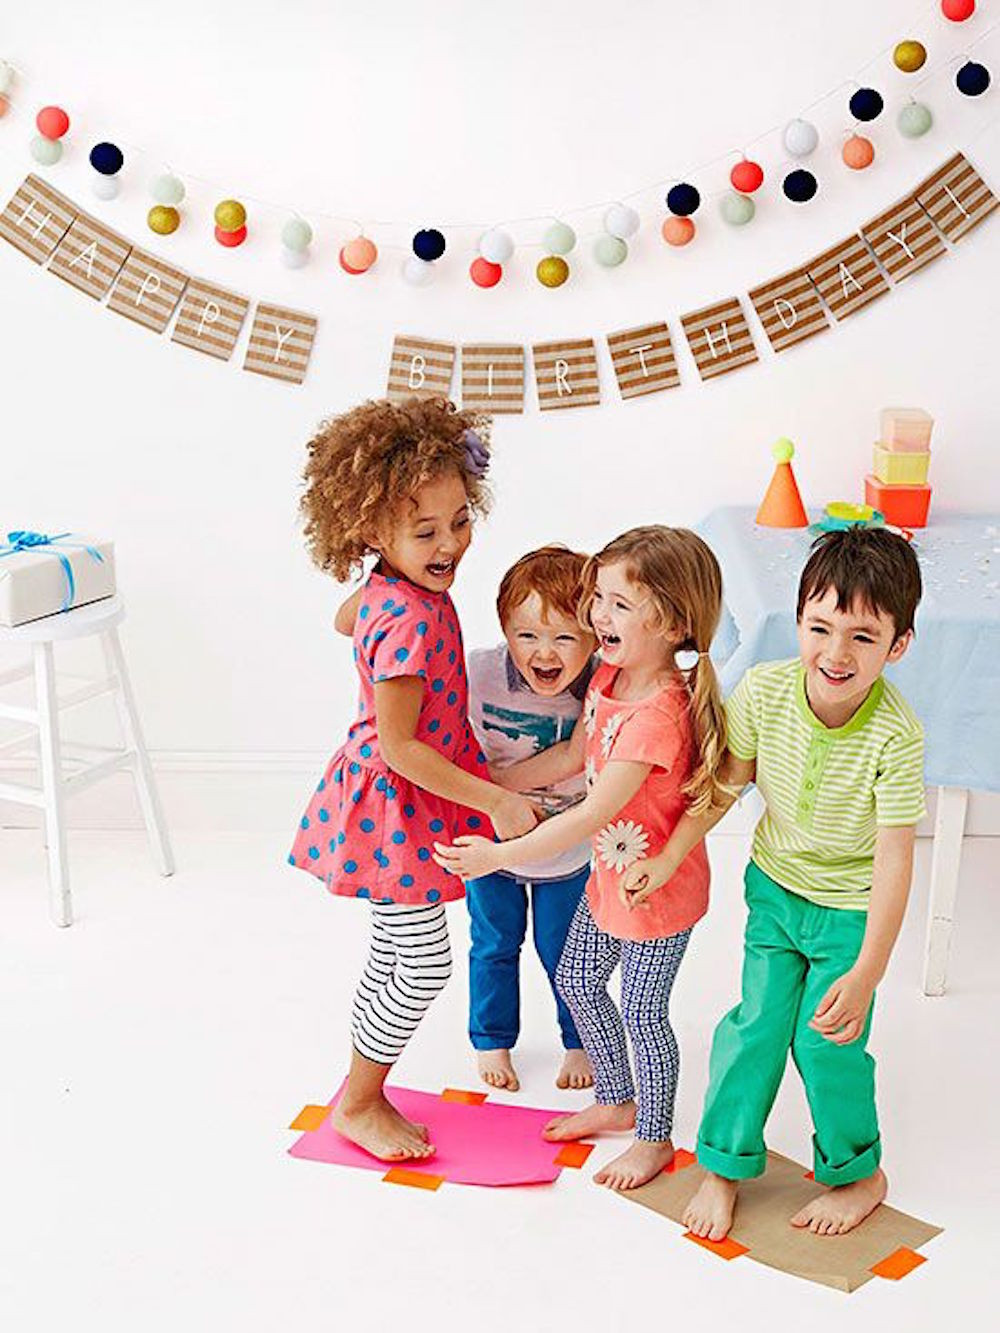 Fun Games For Kids Party
 9 WAYS TO SUCCESSFULLY THROW THE MOST COLORFUL KIDS PARTY